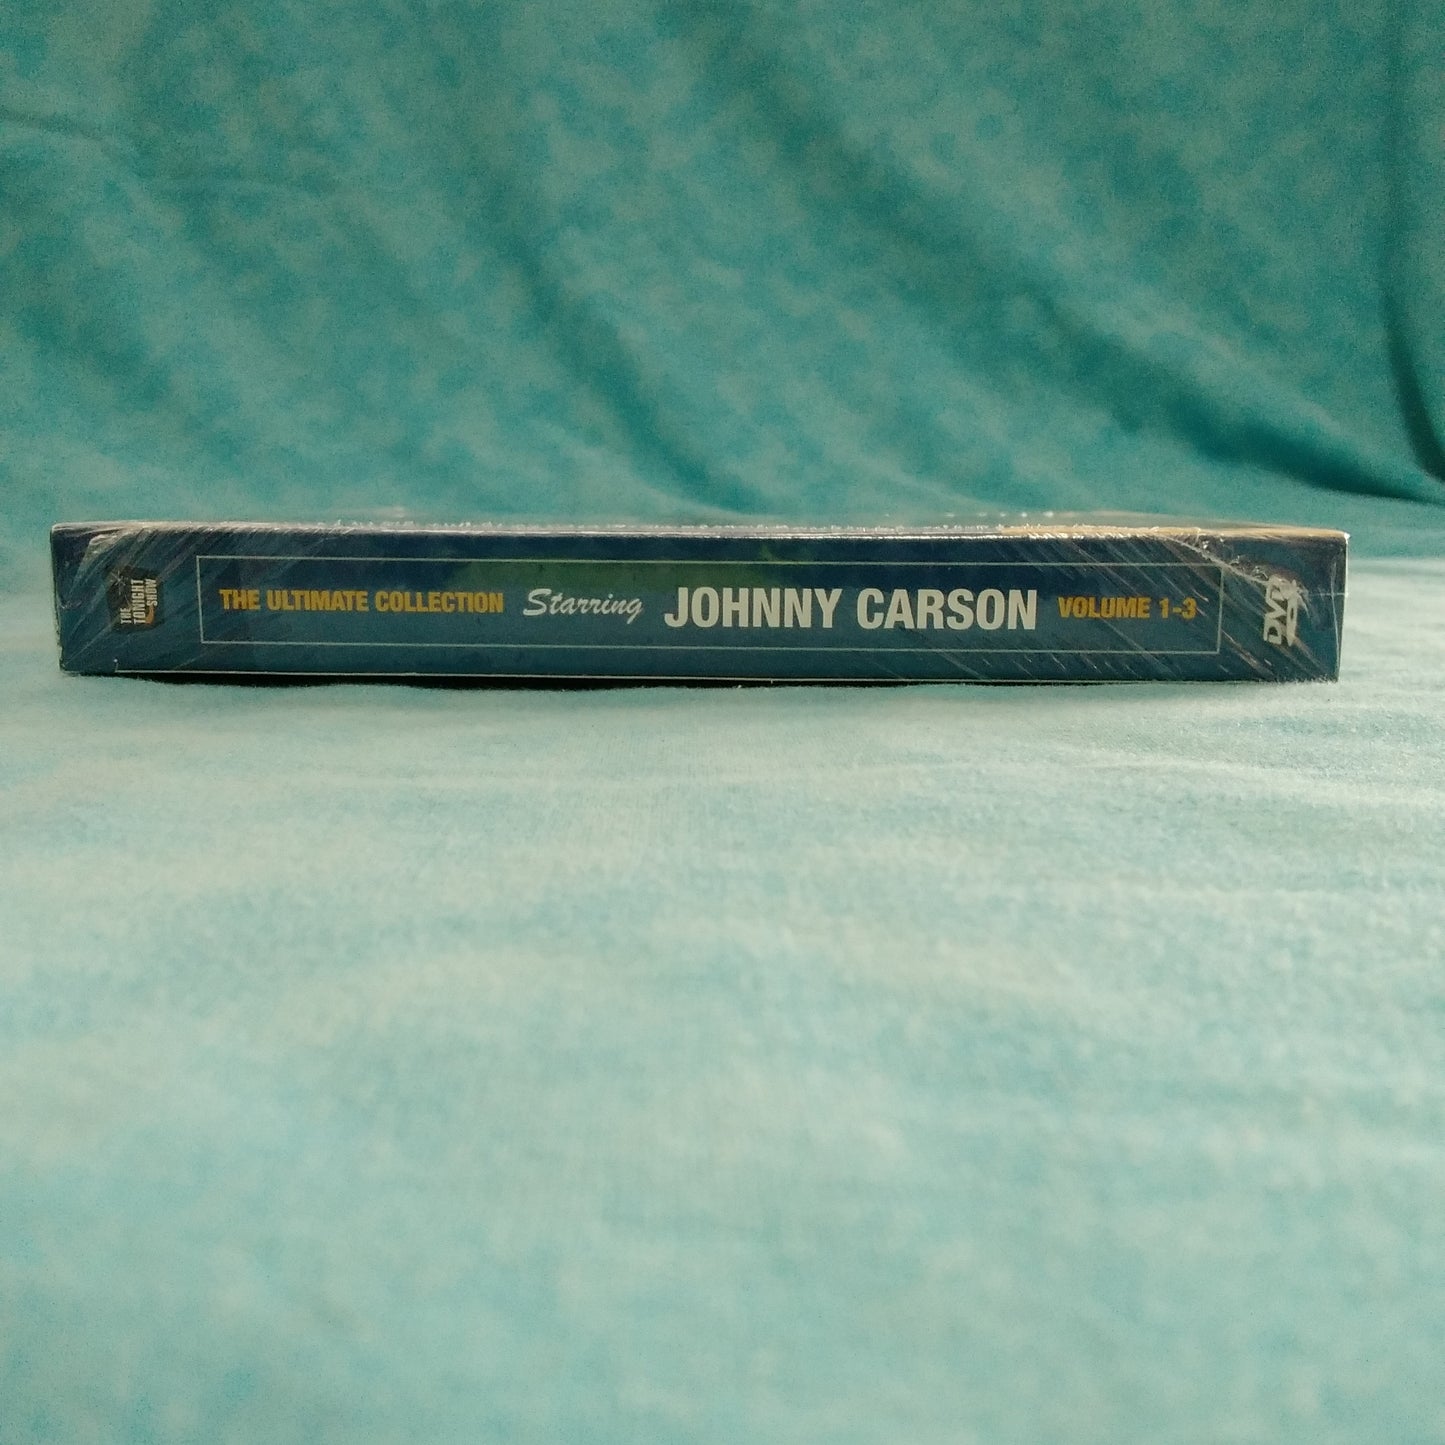 NIB - Johnny Carson 3 DVD set Ultimate Collection 2006 - Tonight Show